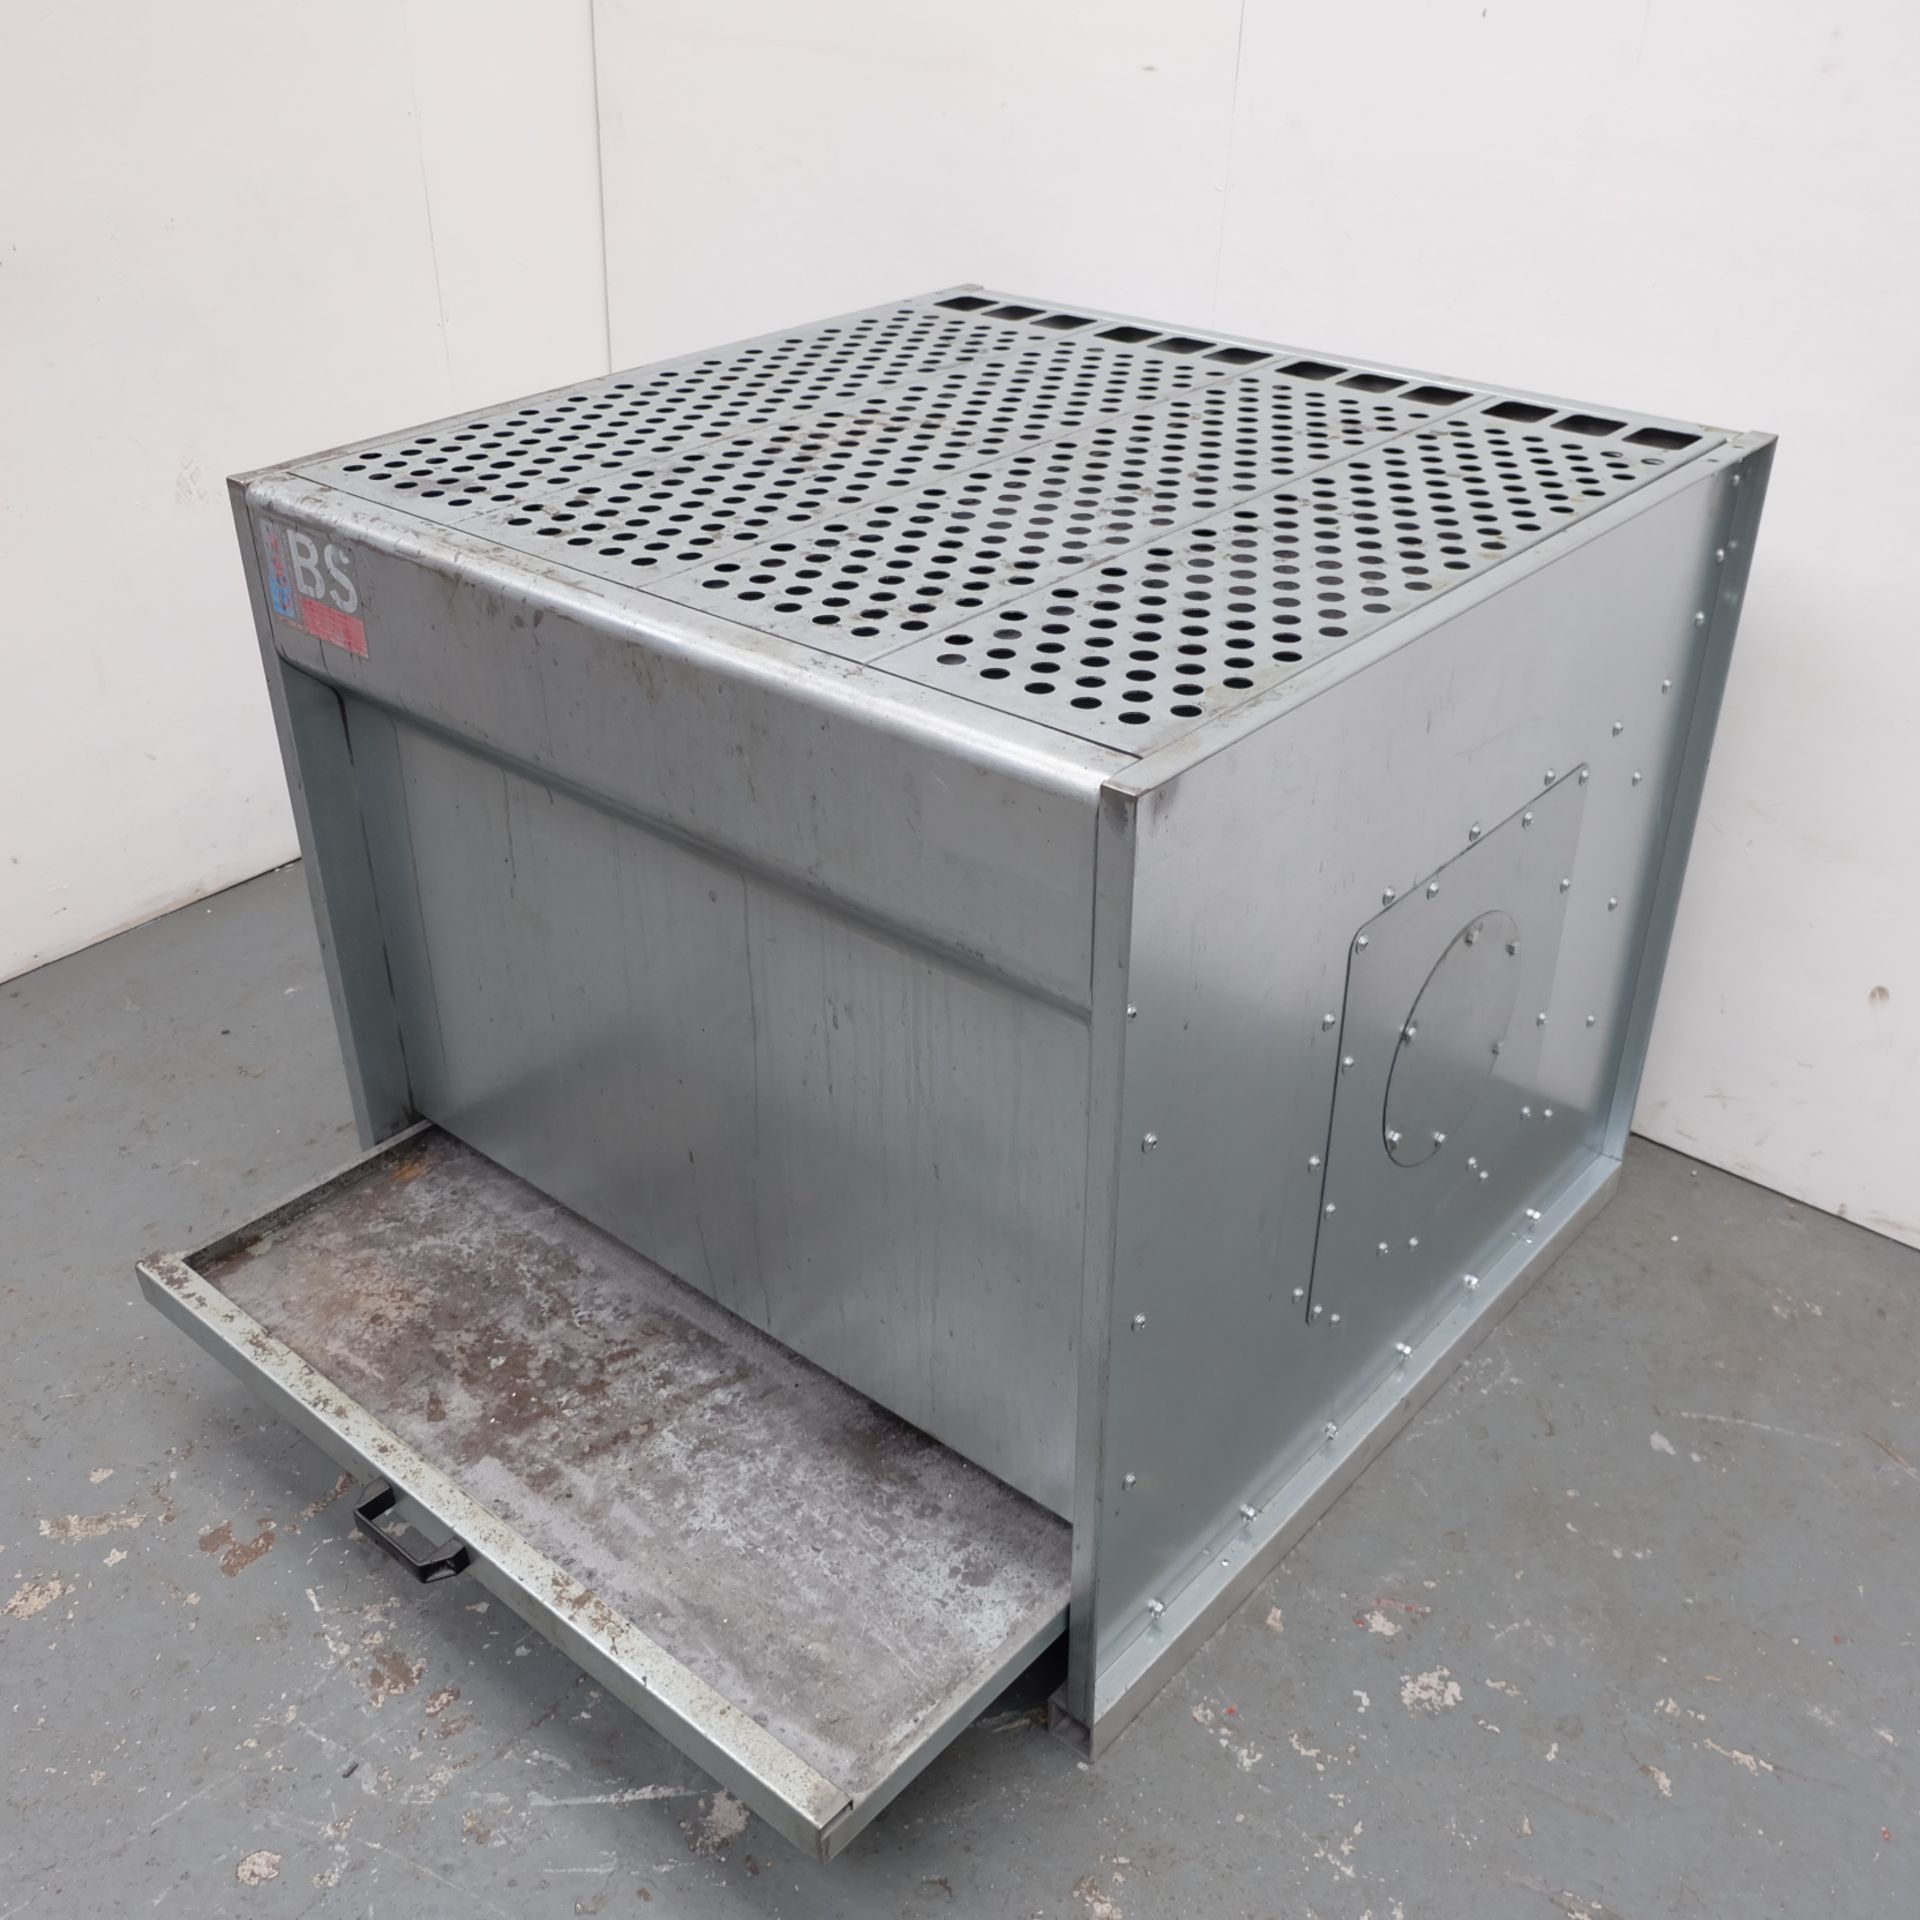 Coral BS/S Welding Bench Without Fan. Size: 42" x 42". Work Height: 36". Made From Galvanised Steel - Image 2 of 4